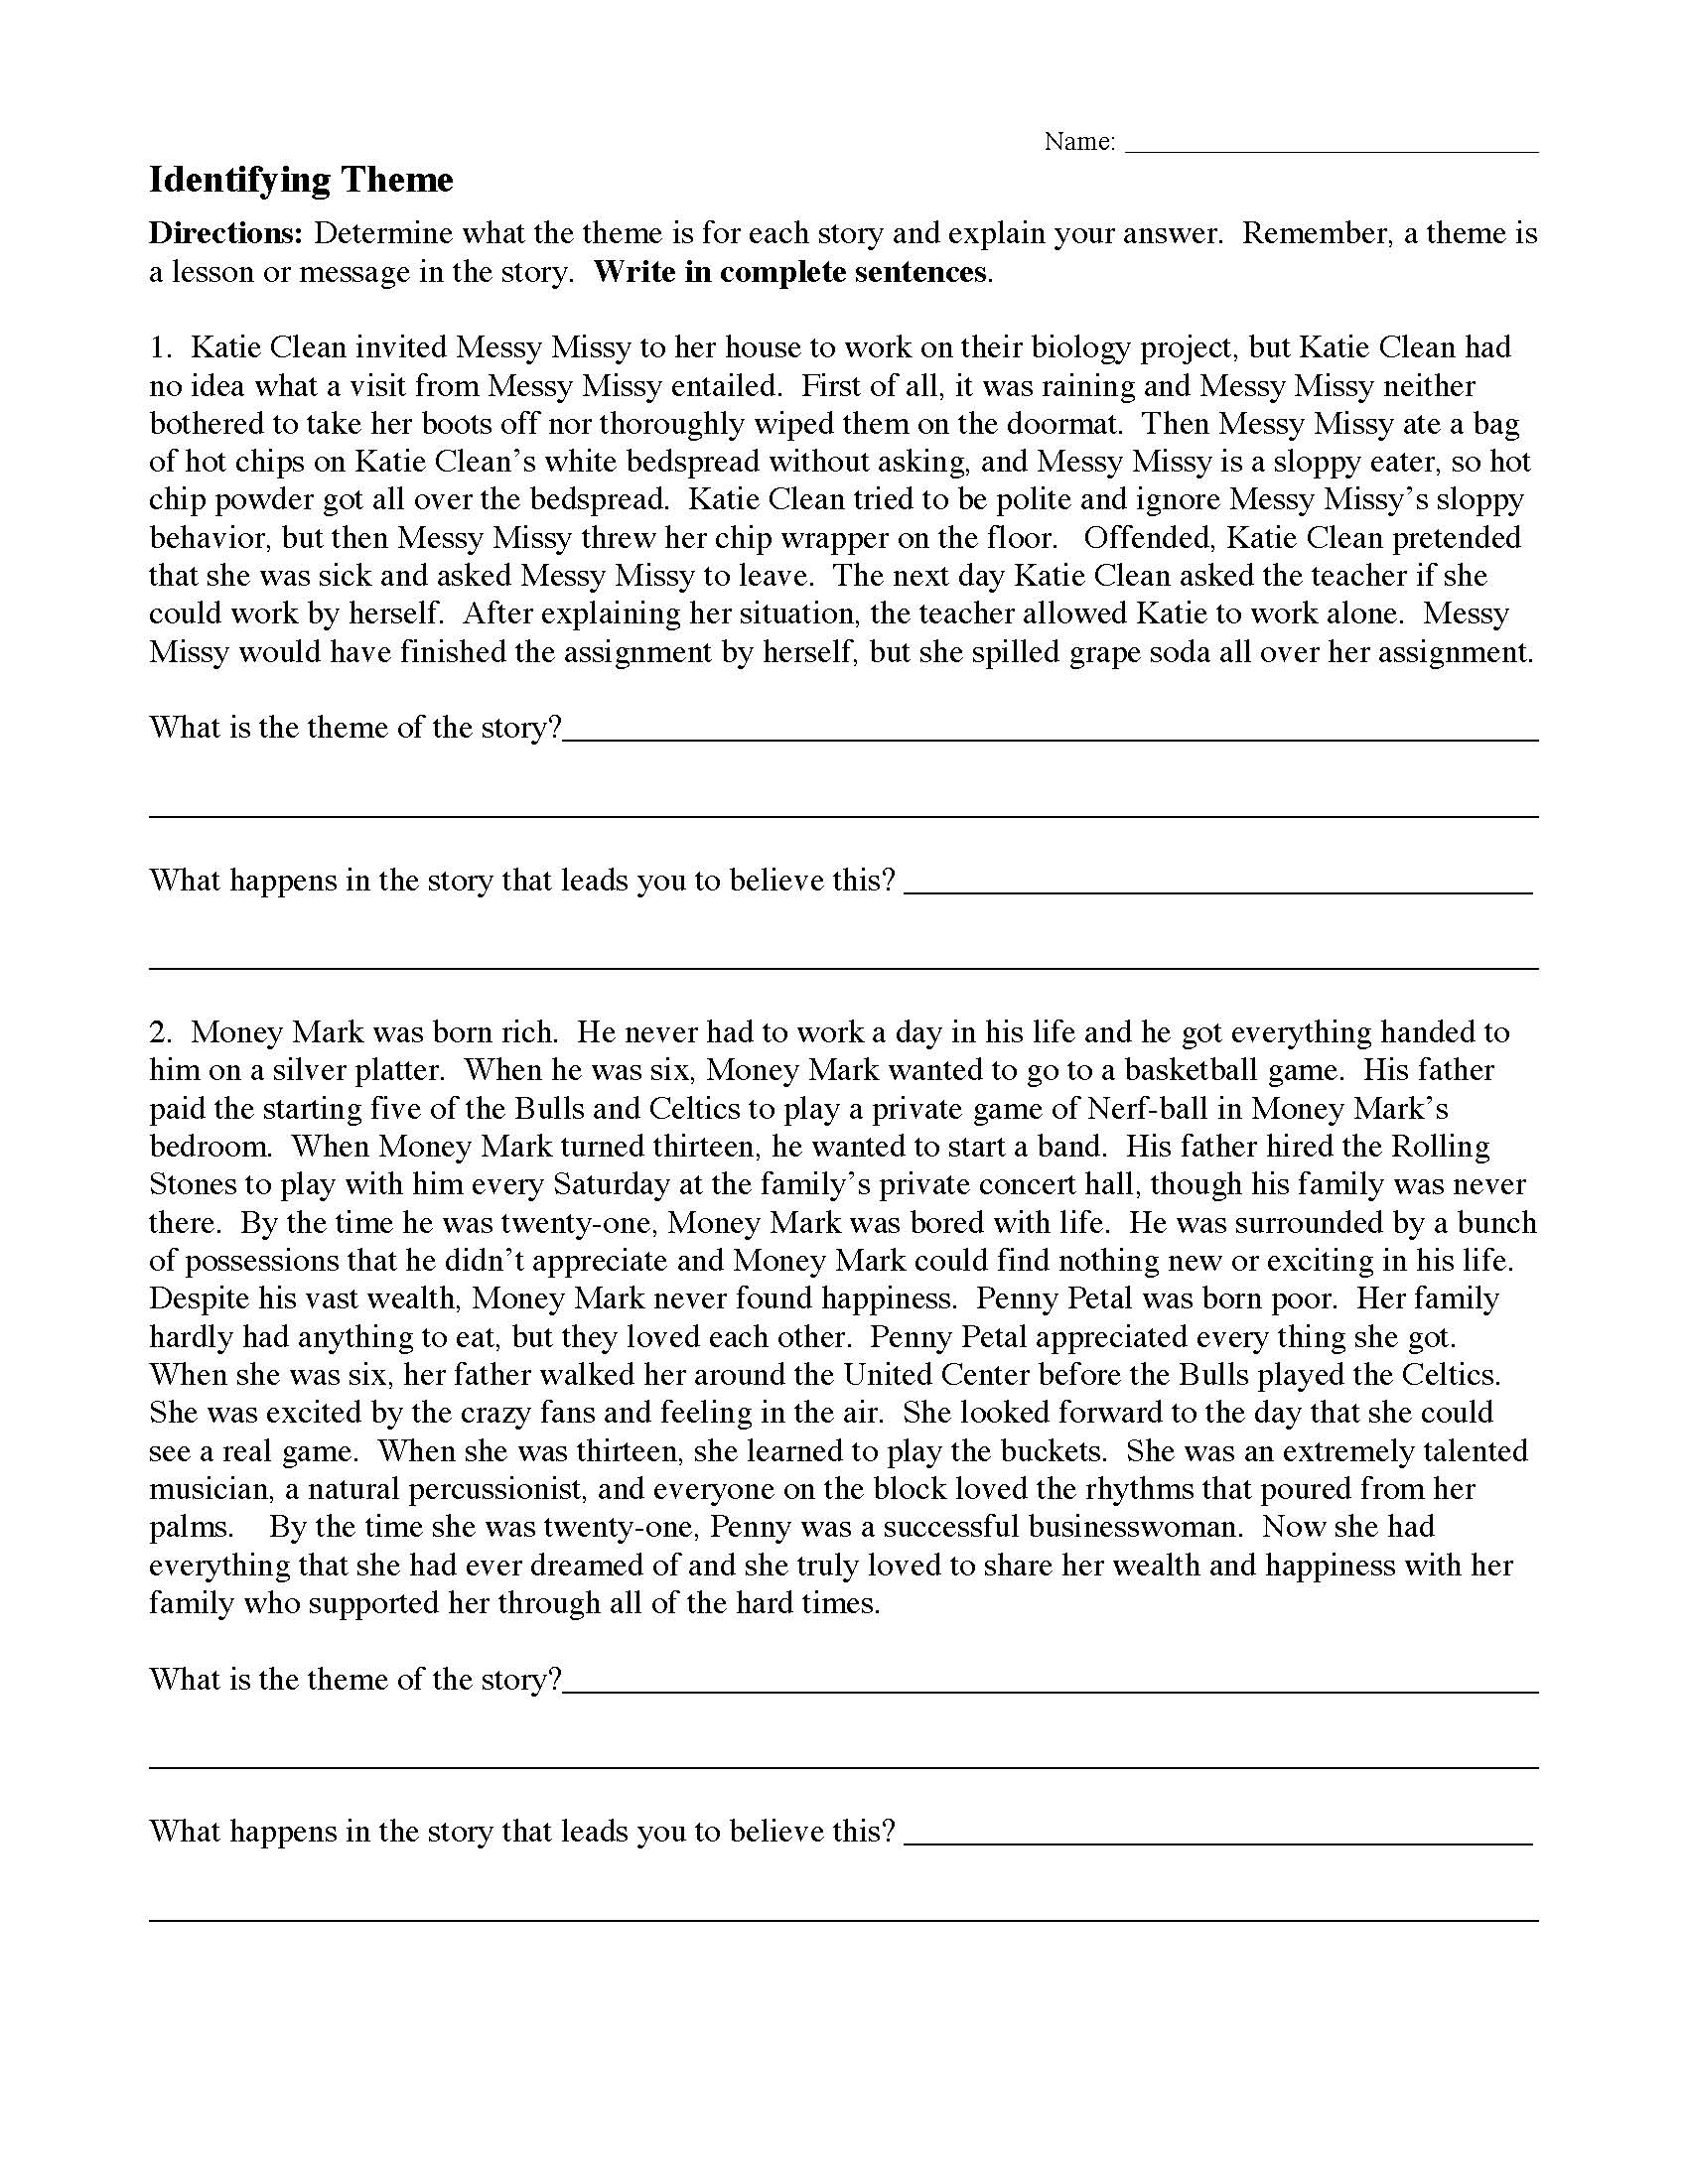 Theme Worksheet 1 | Preview